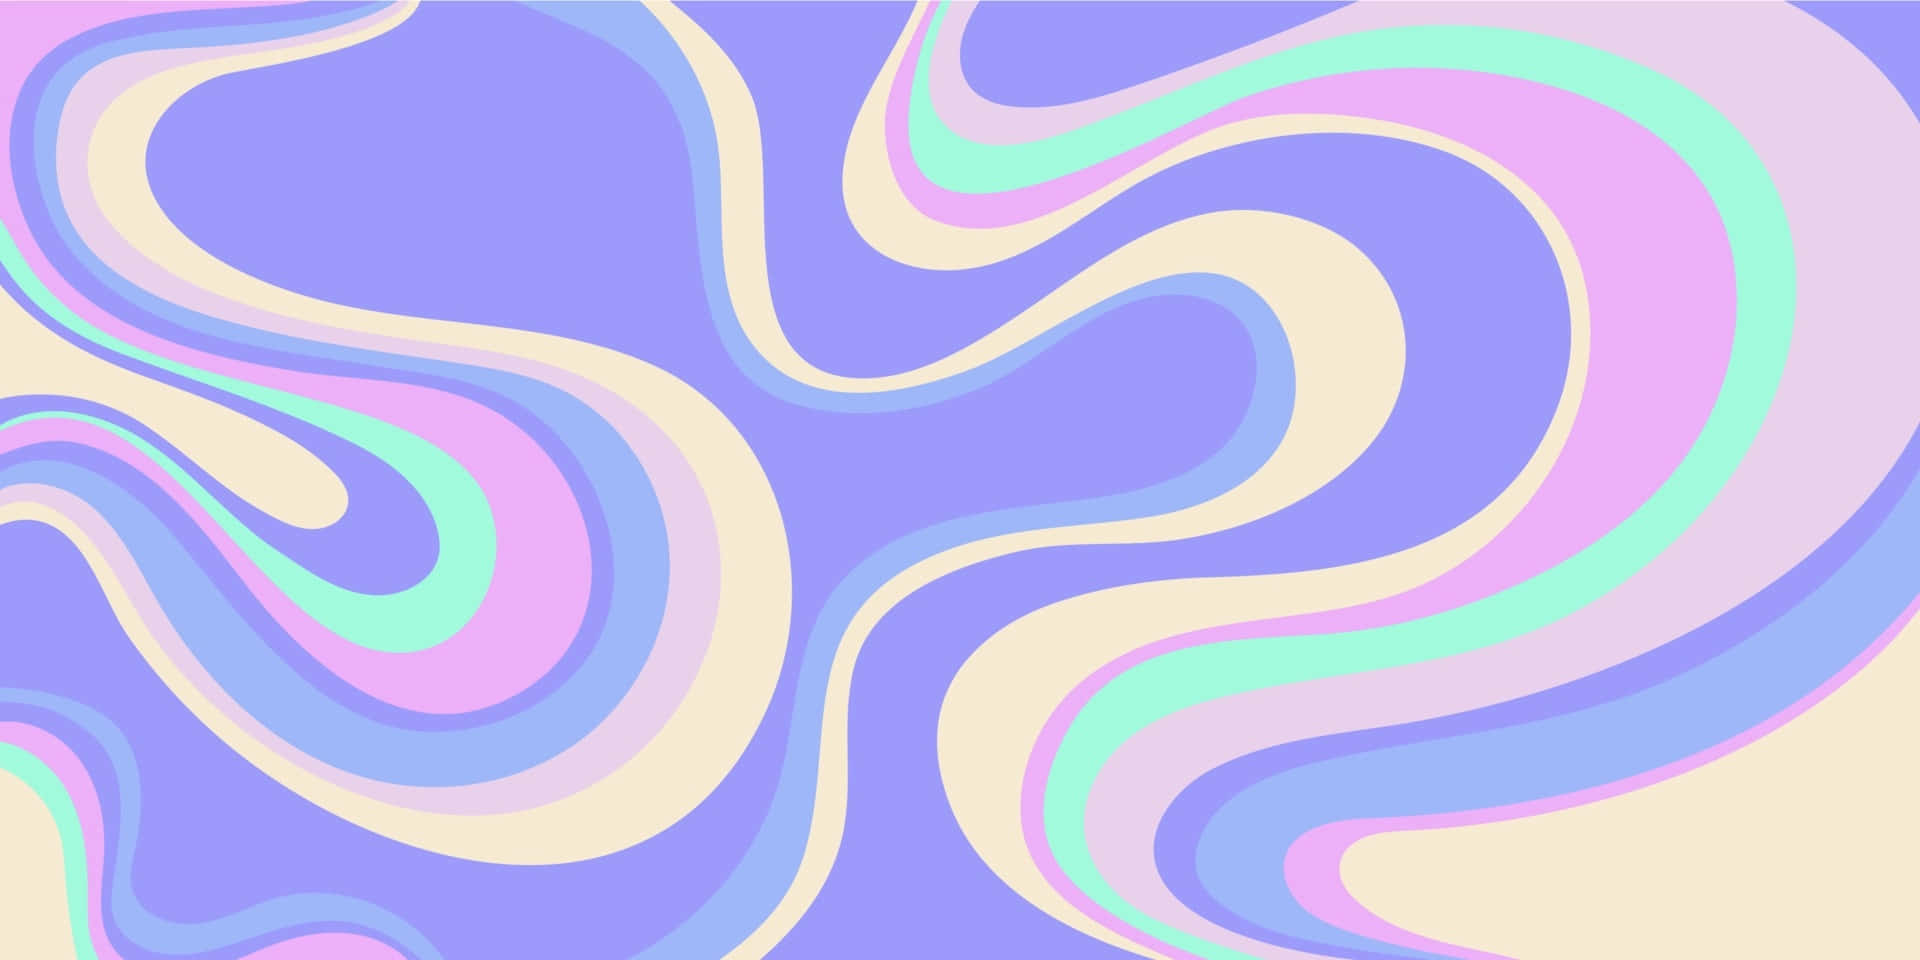 A Colorful Abstract Background With Wavy Lines